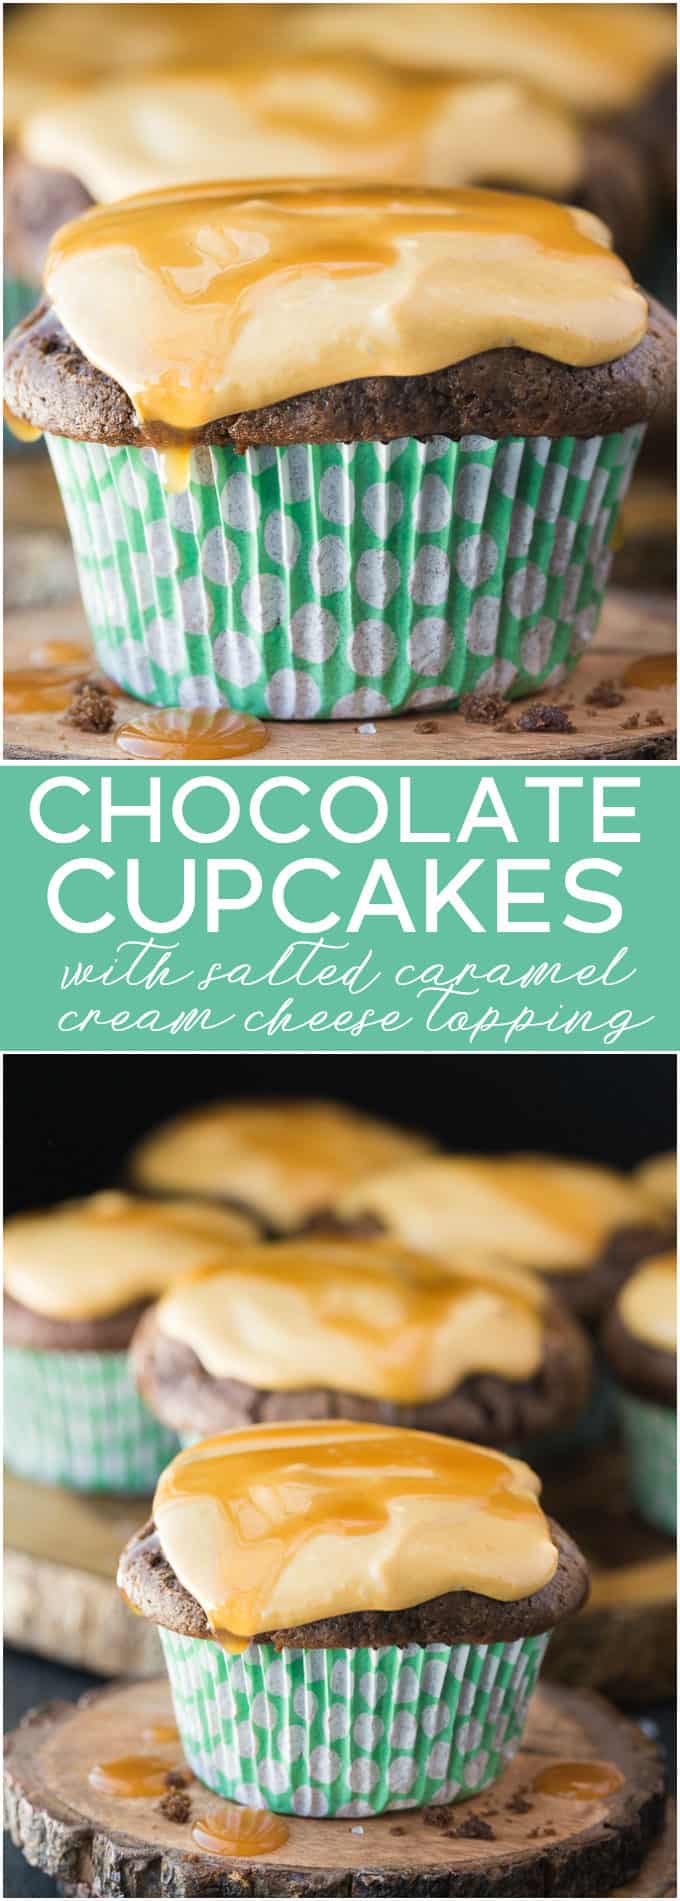 Chocolate Cupcakes with Salted Caramel Cream Cheese Topping - These decadent cupcakes are a delicious balance of salty and sweet. The rich chocolate, sweet caramel and salty tang of the cream cheese frosting will hit every flavour note.